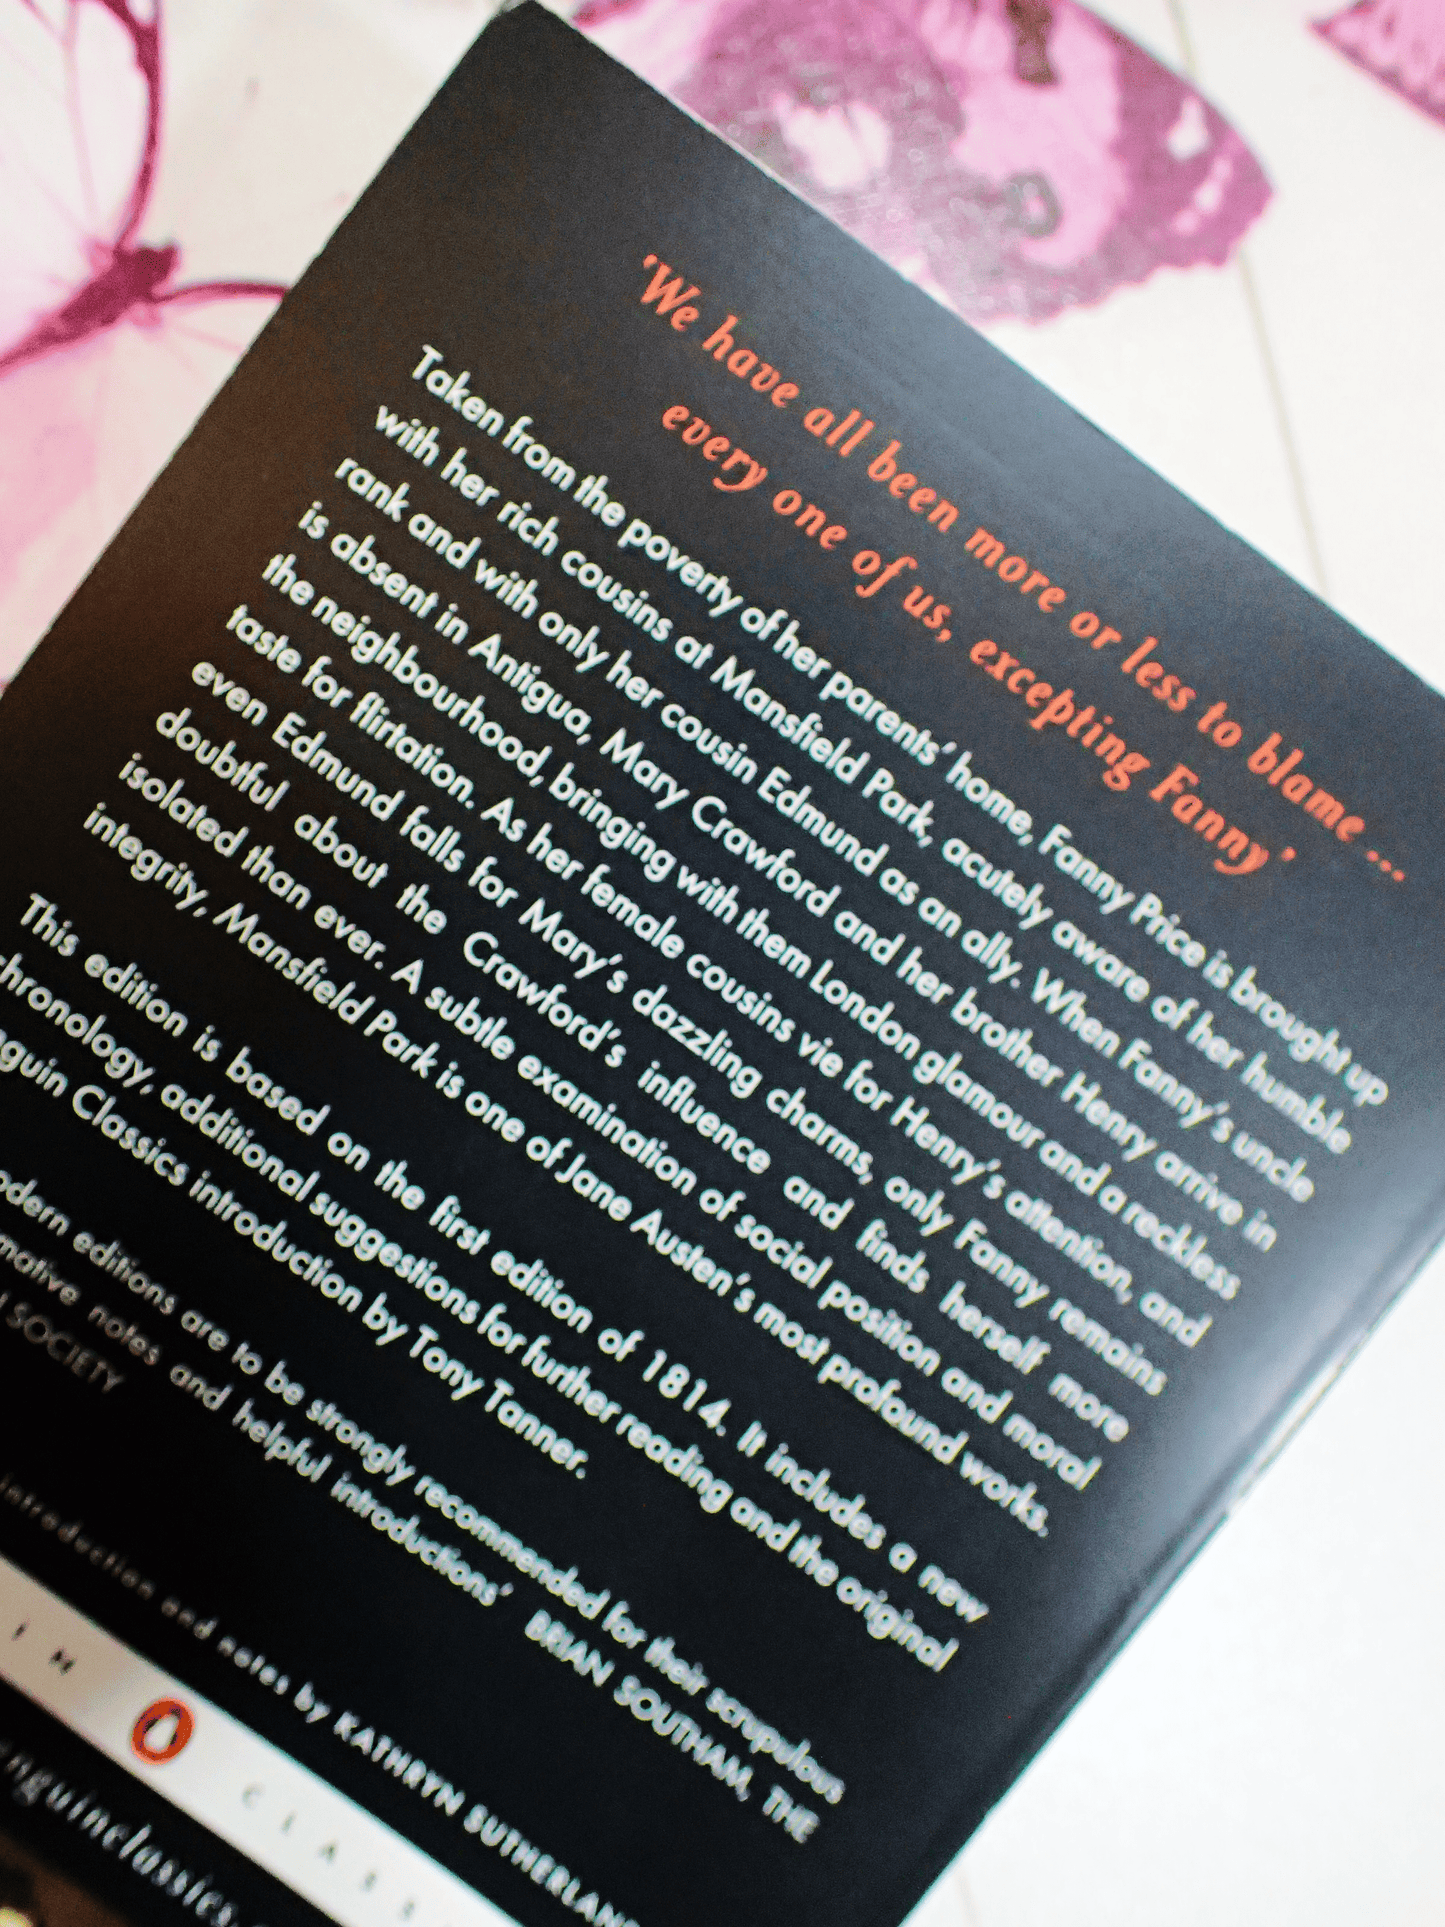 Back cover of Mansfield Park Jane Austen Penguin Classics showing information about the novel. "We have all been more or less to blame, every one of us, excepting Fanny."